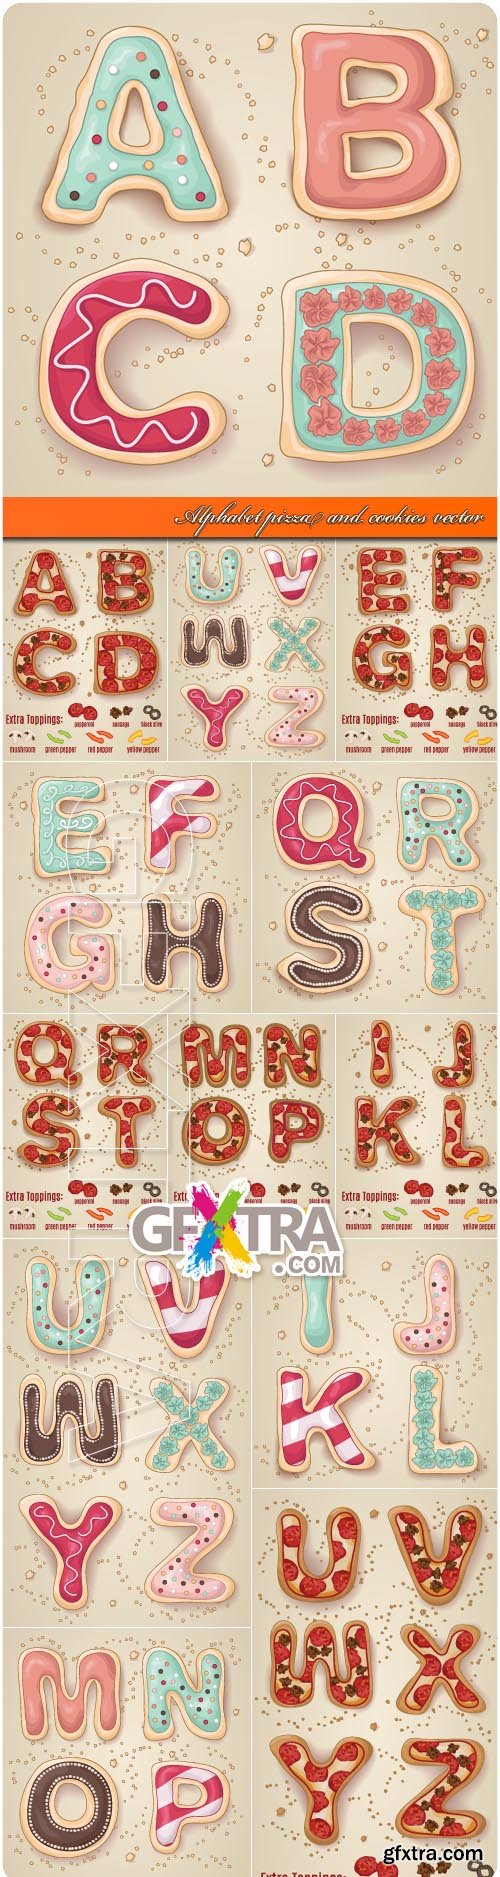 Alphabet pizza and cookies vector